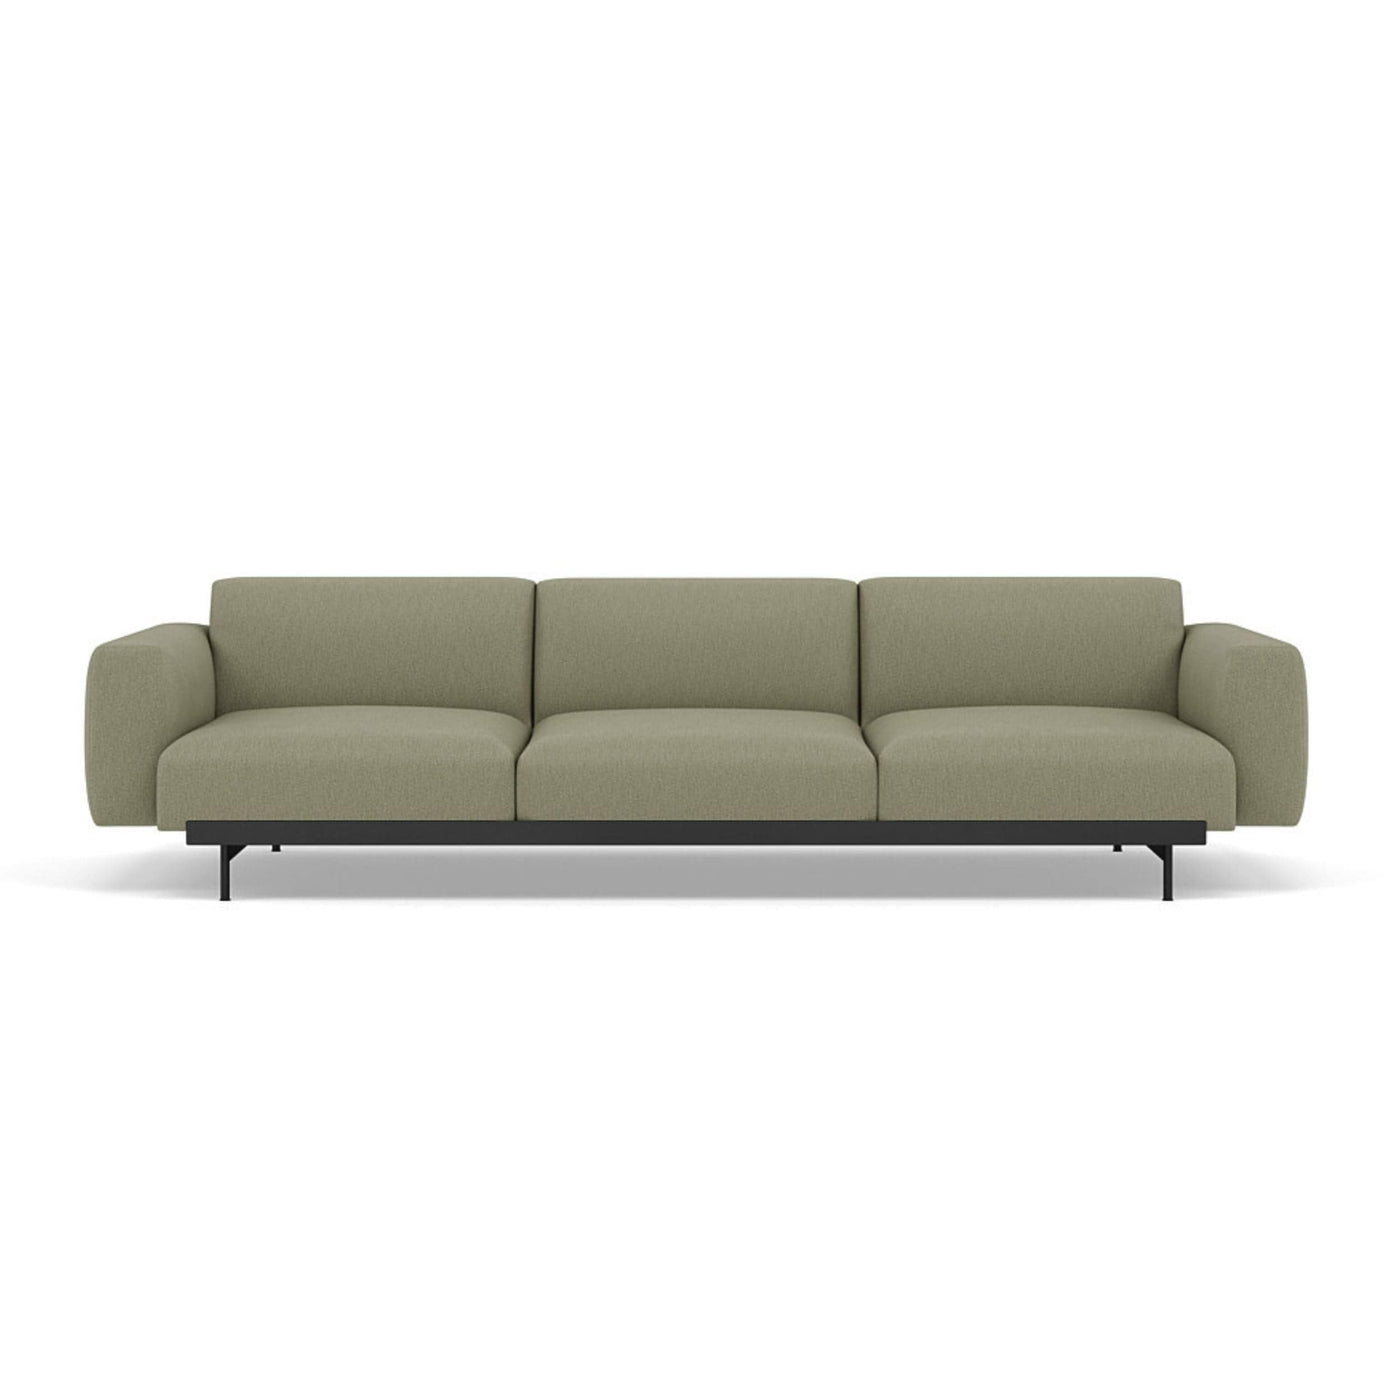 Muuto In Situ Sofa 3 seater configuration 1 in clay 15 fabric. Made to order at someday designs. #colour_clay-15